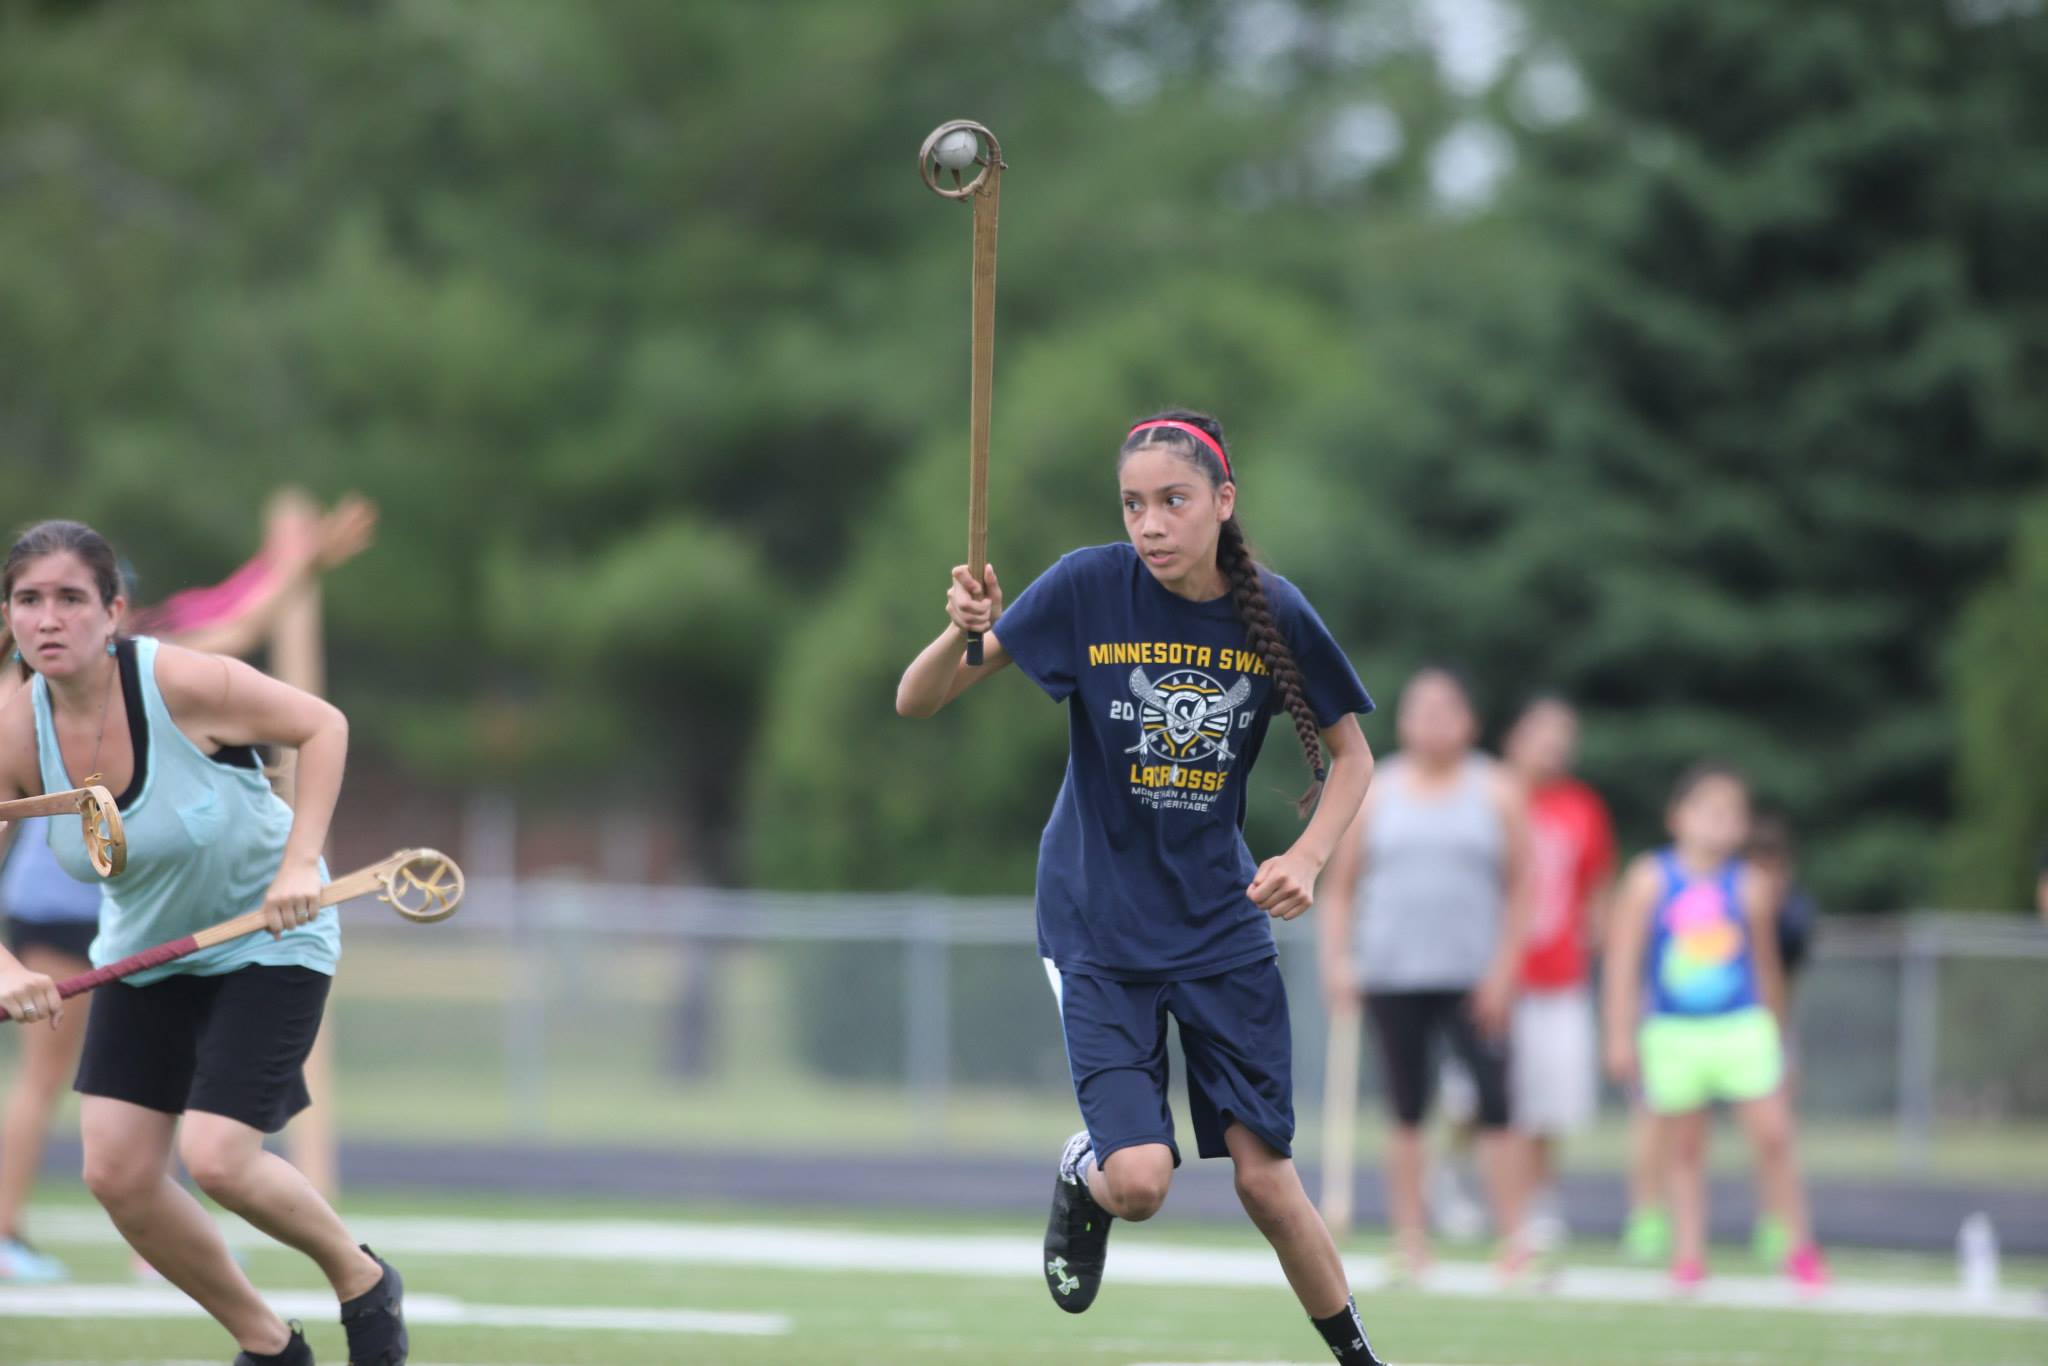  Eighth grader Nina Polk competes in the 215 wooden stick tournament. Nina and her mother, Dyani Whitehawk, are members of the adult women's team.&nbsp; 